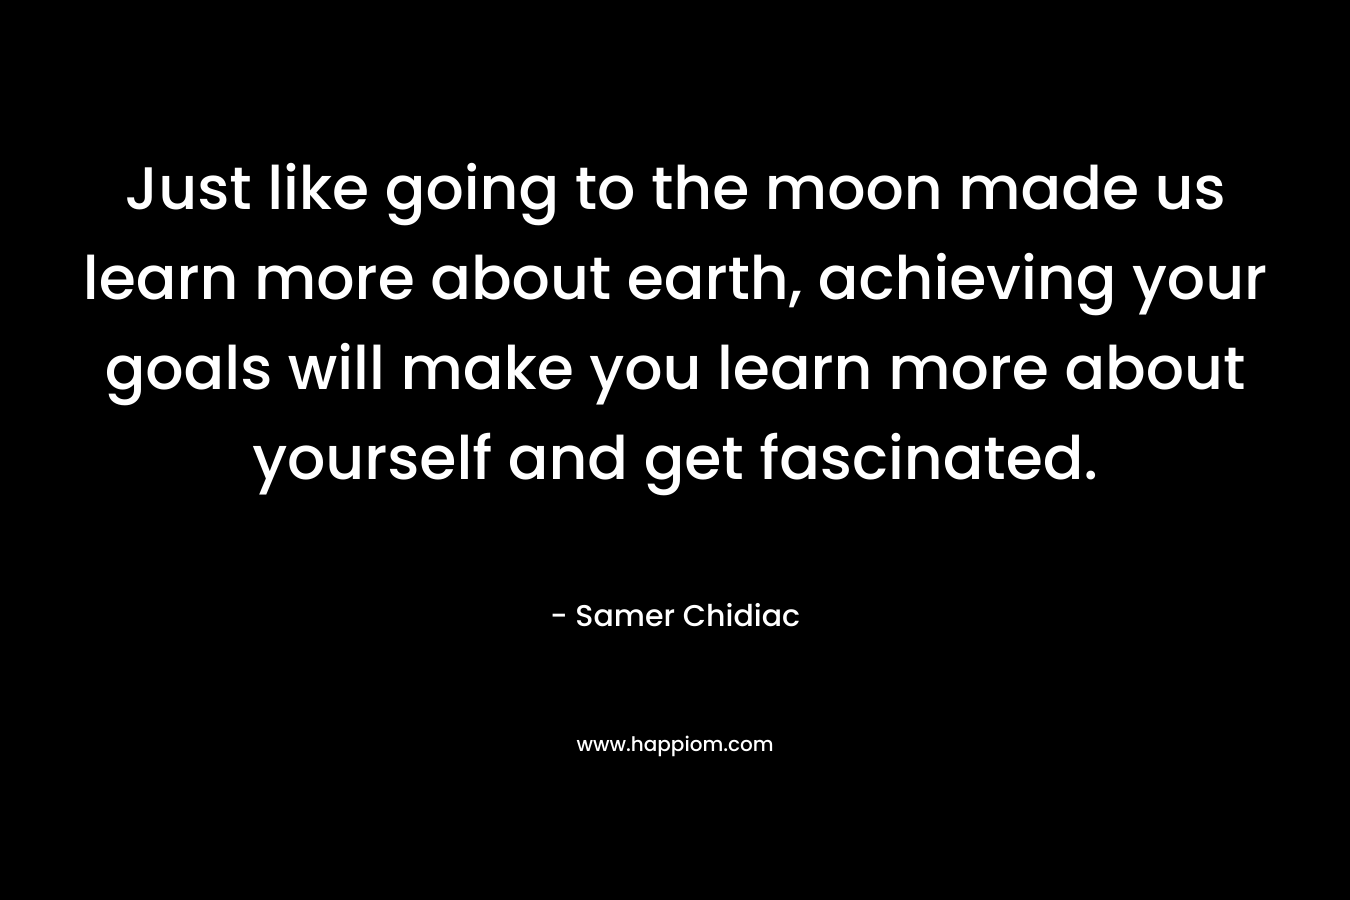 Just like going to the moon made us learn more about earth, achieving your goals will make you learn more about yourself and get fascinated. – Samer Chidiac